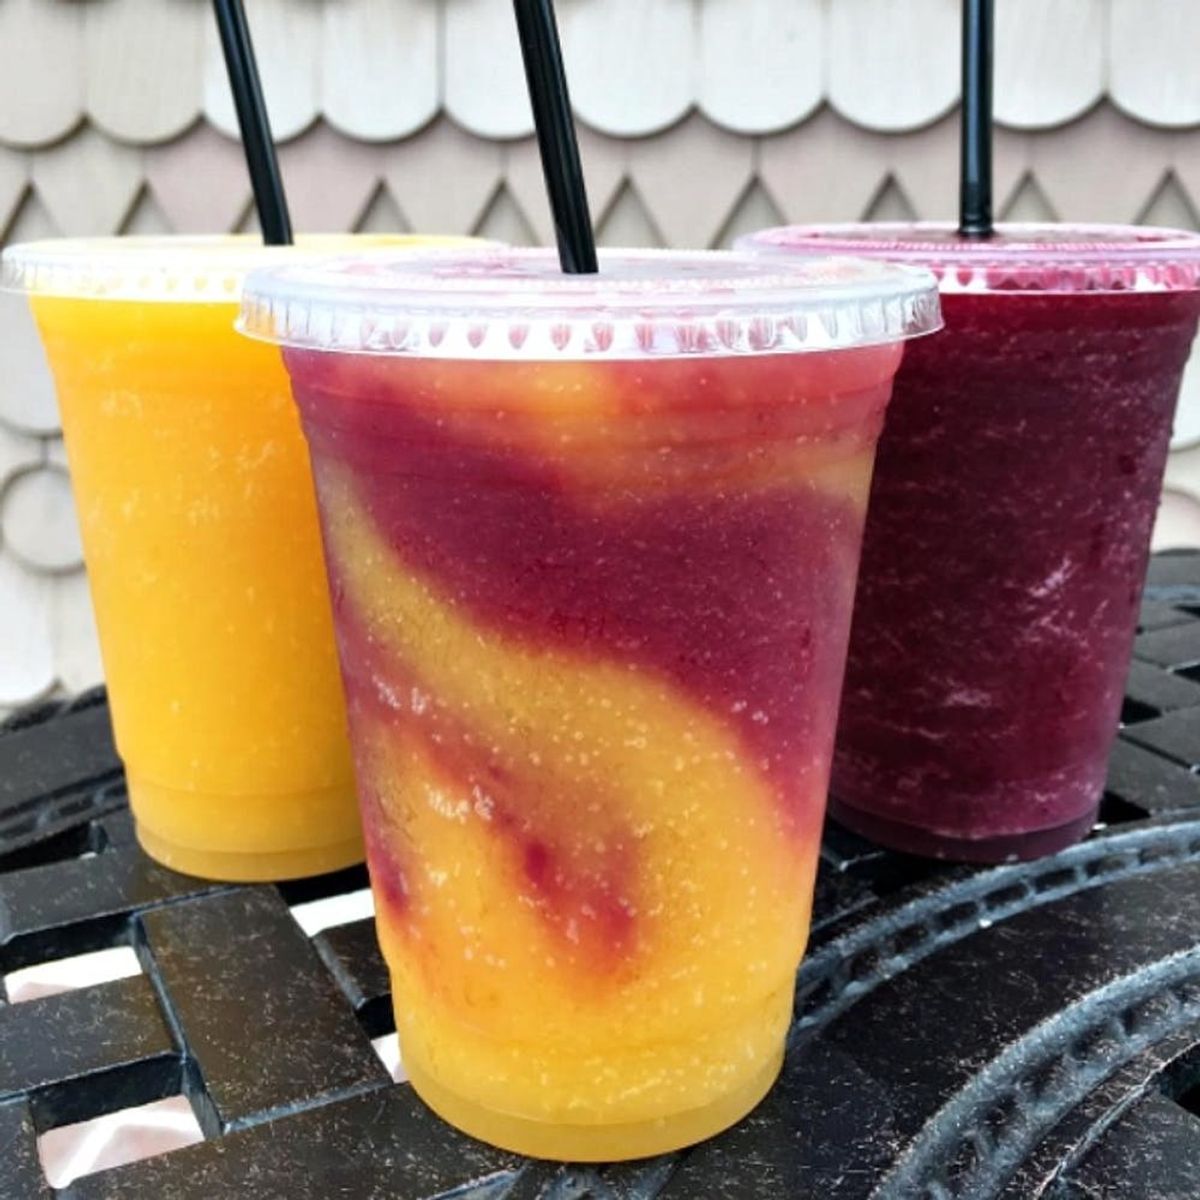 Long Day at Disney World? There’s a Wine Slushie for That